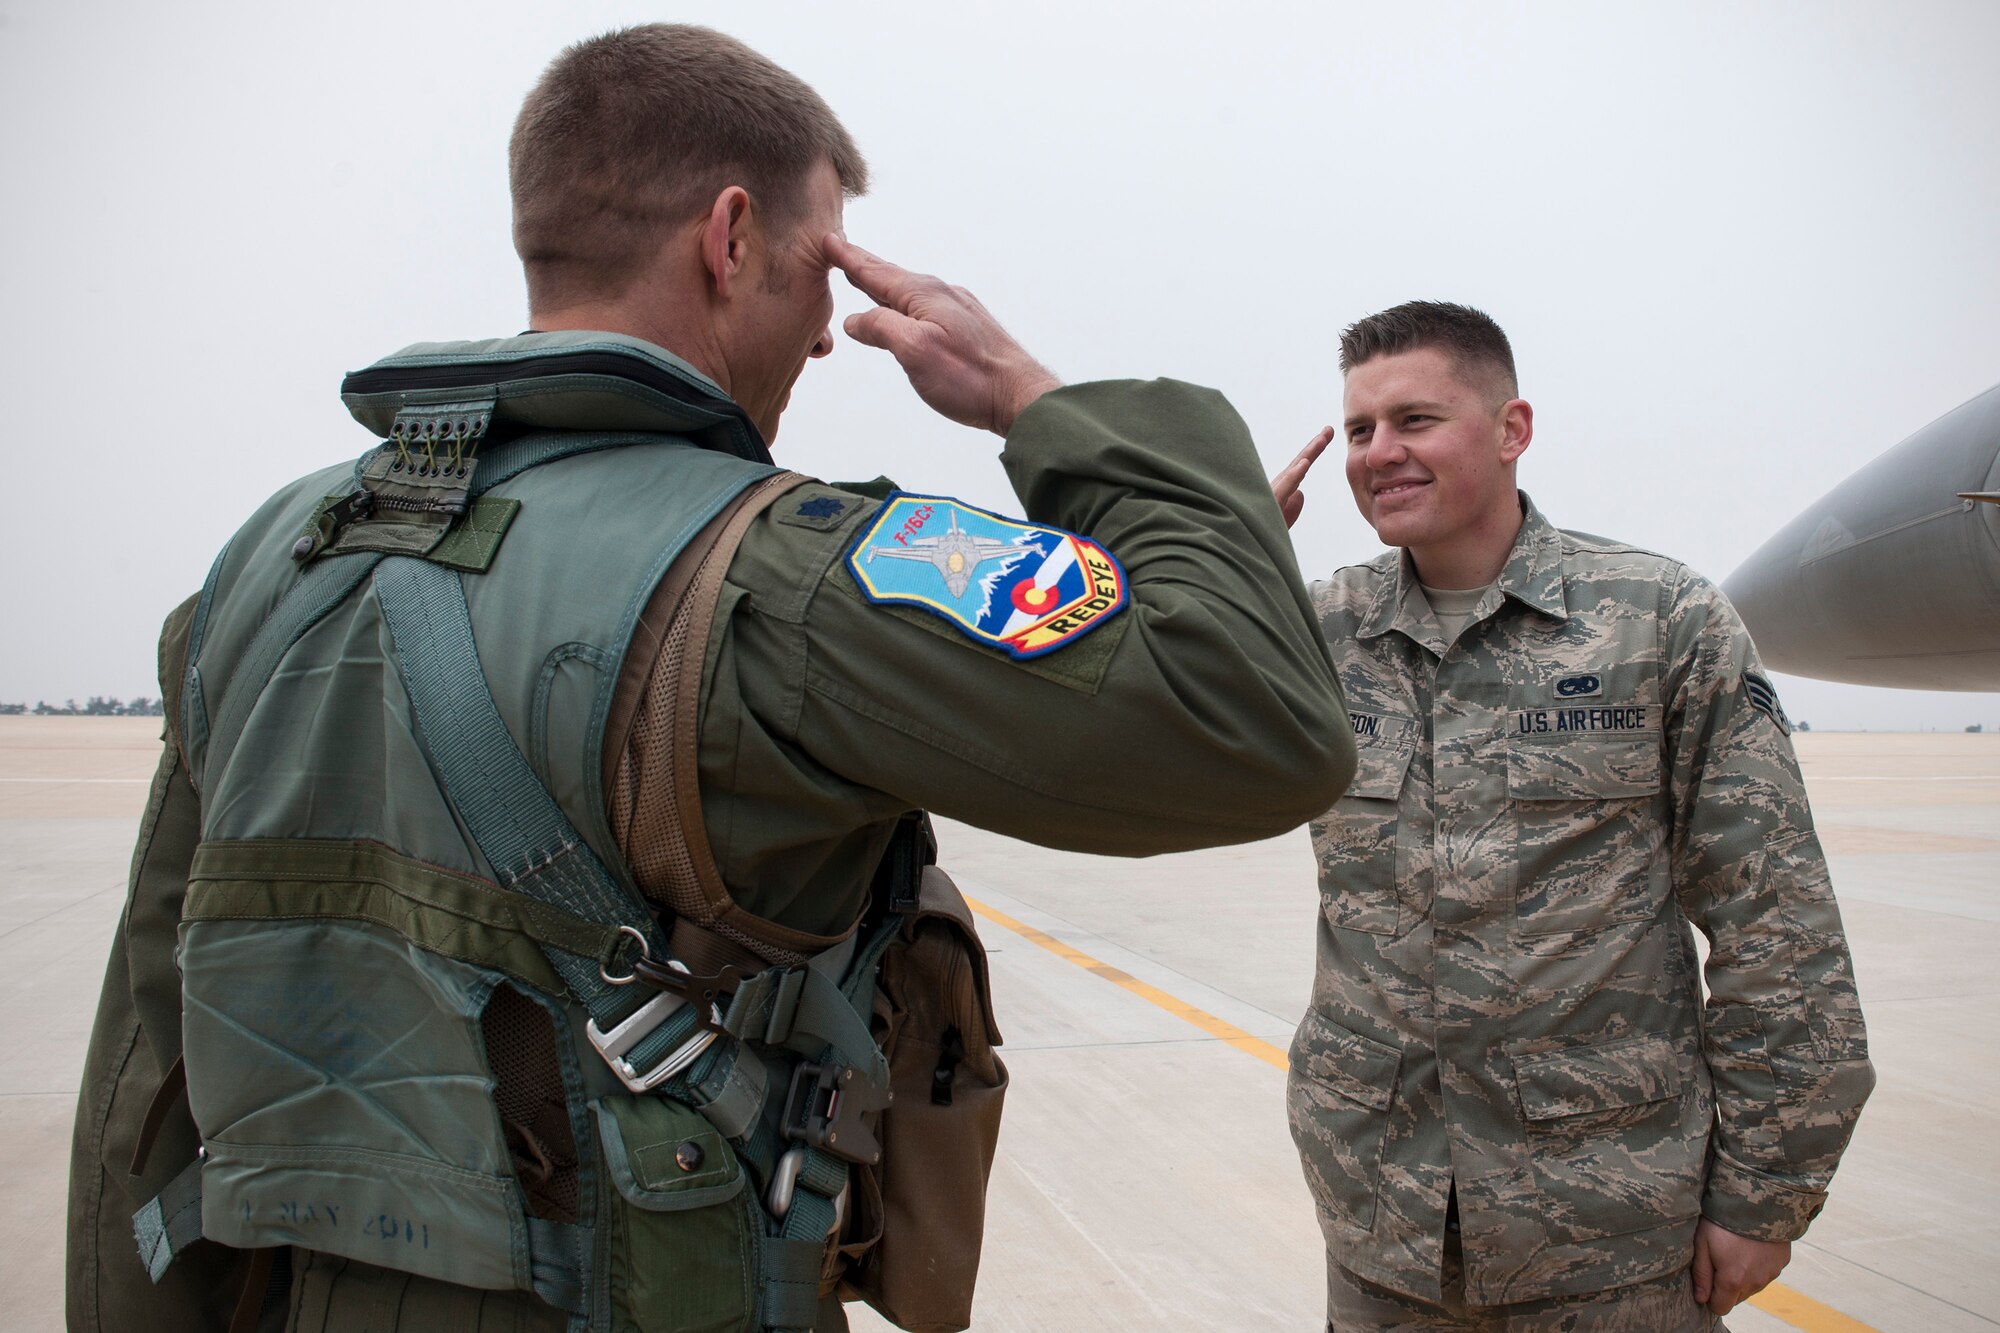 Senior Airman Mitchell Jamison, 120th Expeditionary Aircraft Maintenance Unit crew chief, salutes his father, Lt. Col. James Reeman, 120th Expeditionary Fighter Squadron F-16 Fighting Falcon pilot, April 16, 2015, at Kunsan Air Base, Republic of Korea. Reeman and Jamison, both from the 140th Wing, Colorado Air National Guard, are temporarily assigned to the Wolf Pack as part of a rotational Theater Security Package for approximately three months. (U.S. Air Force photo by Senior Airman Katrina Heikkinen/Released)